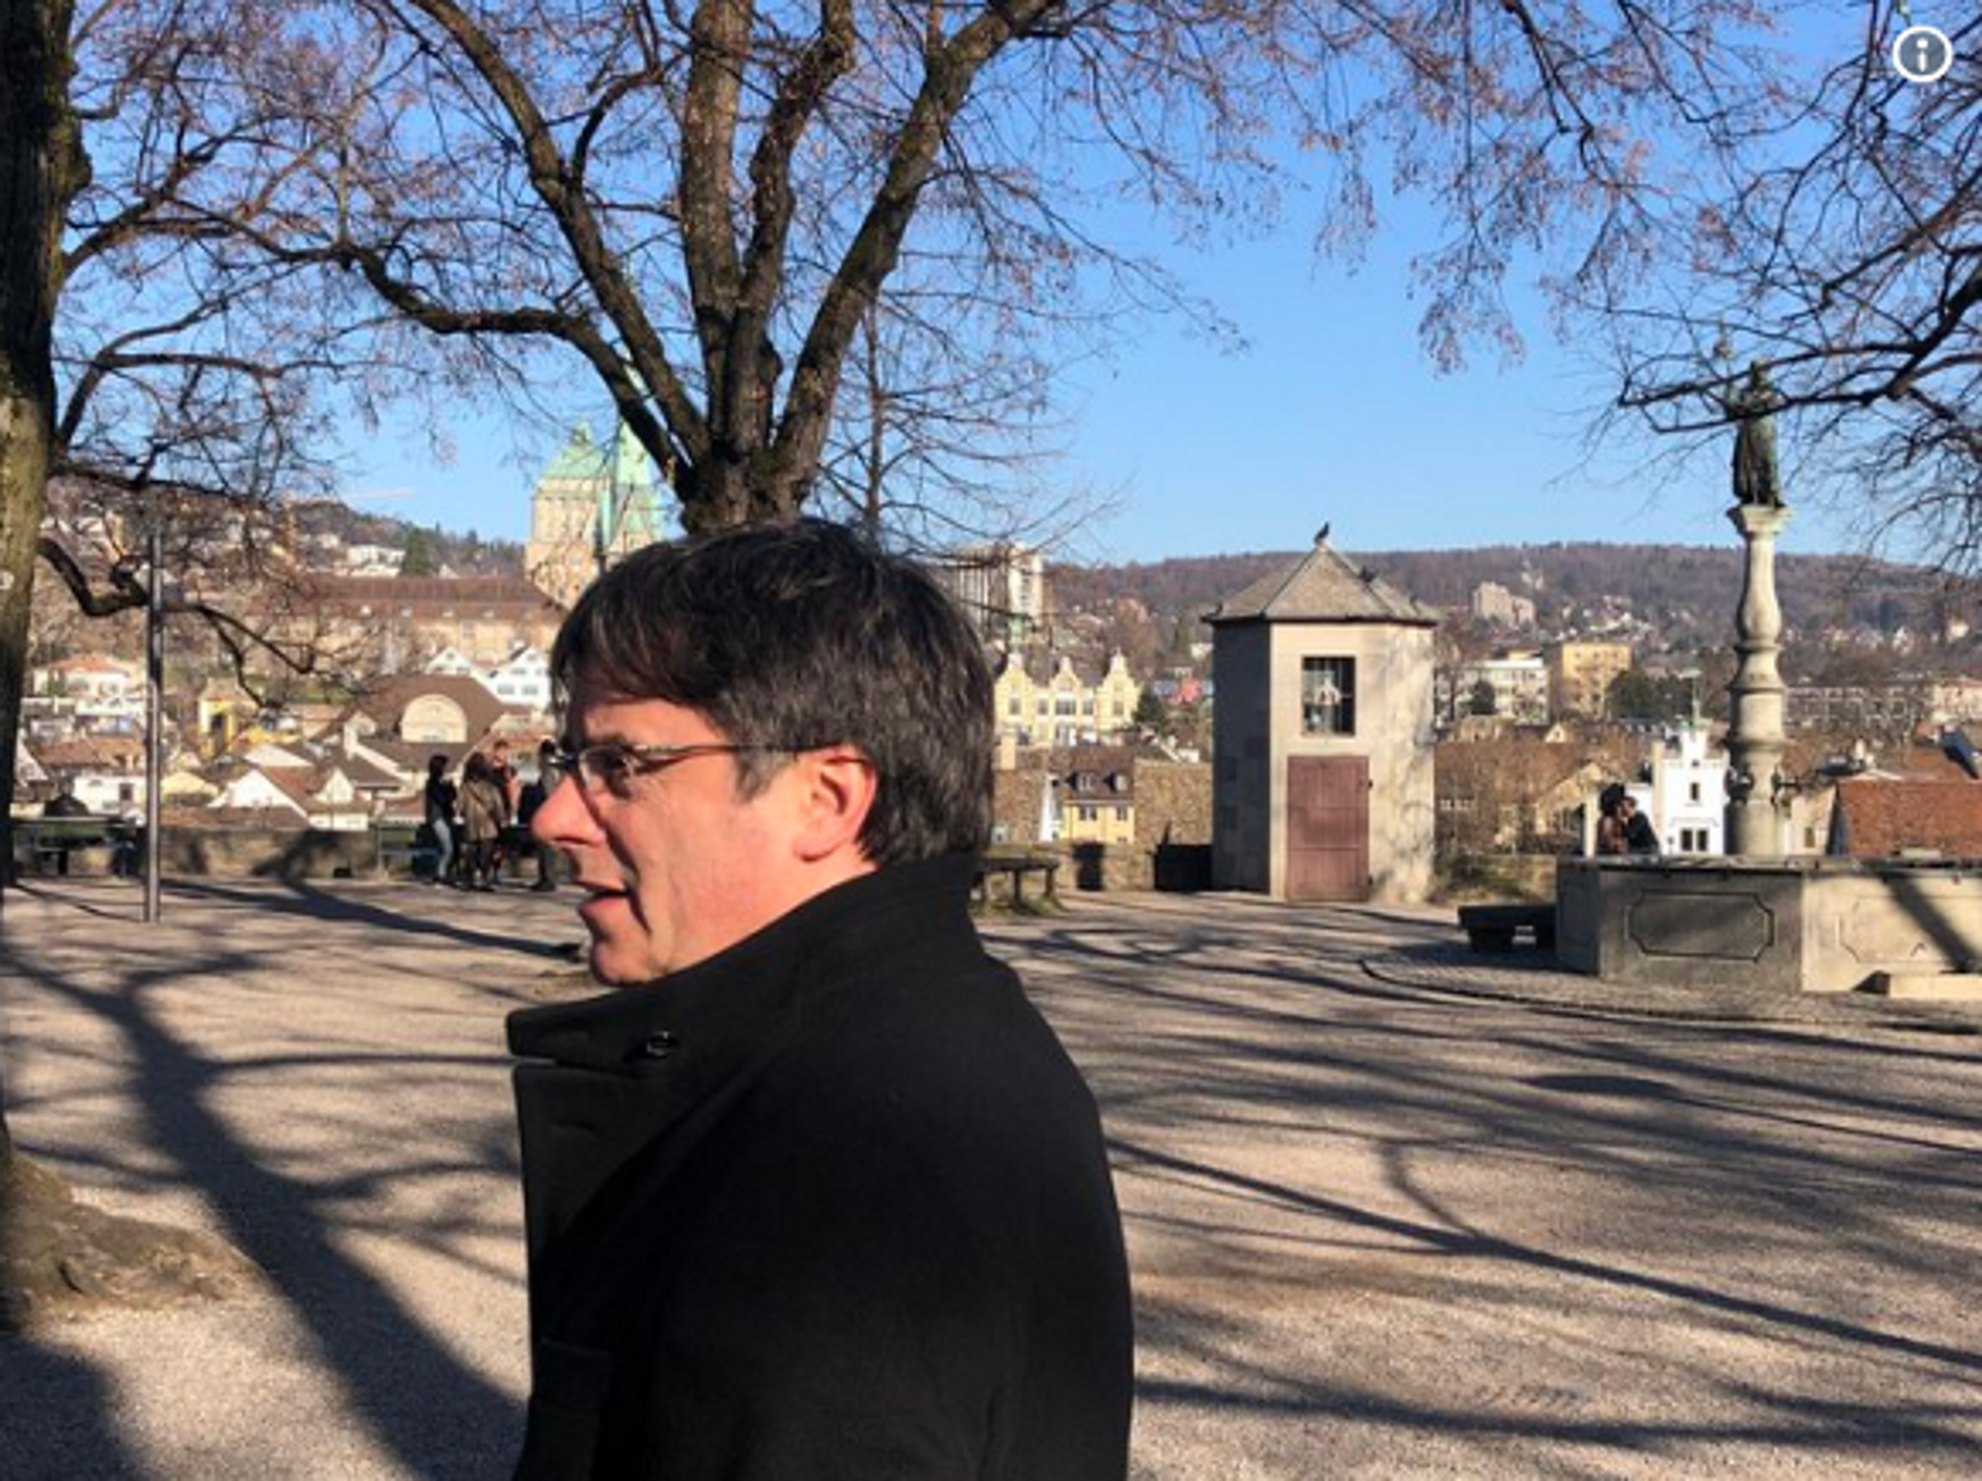 Puigdemont tells Swiss newspaper: "A 'de facto' recognition of Catalonia is growing"